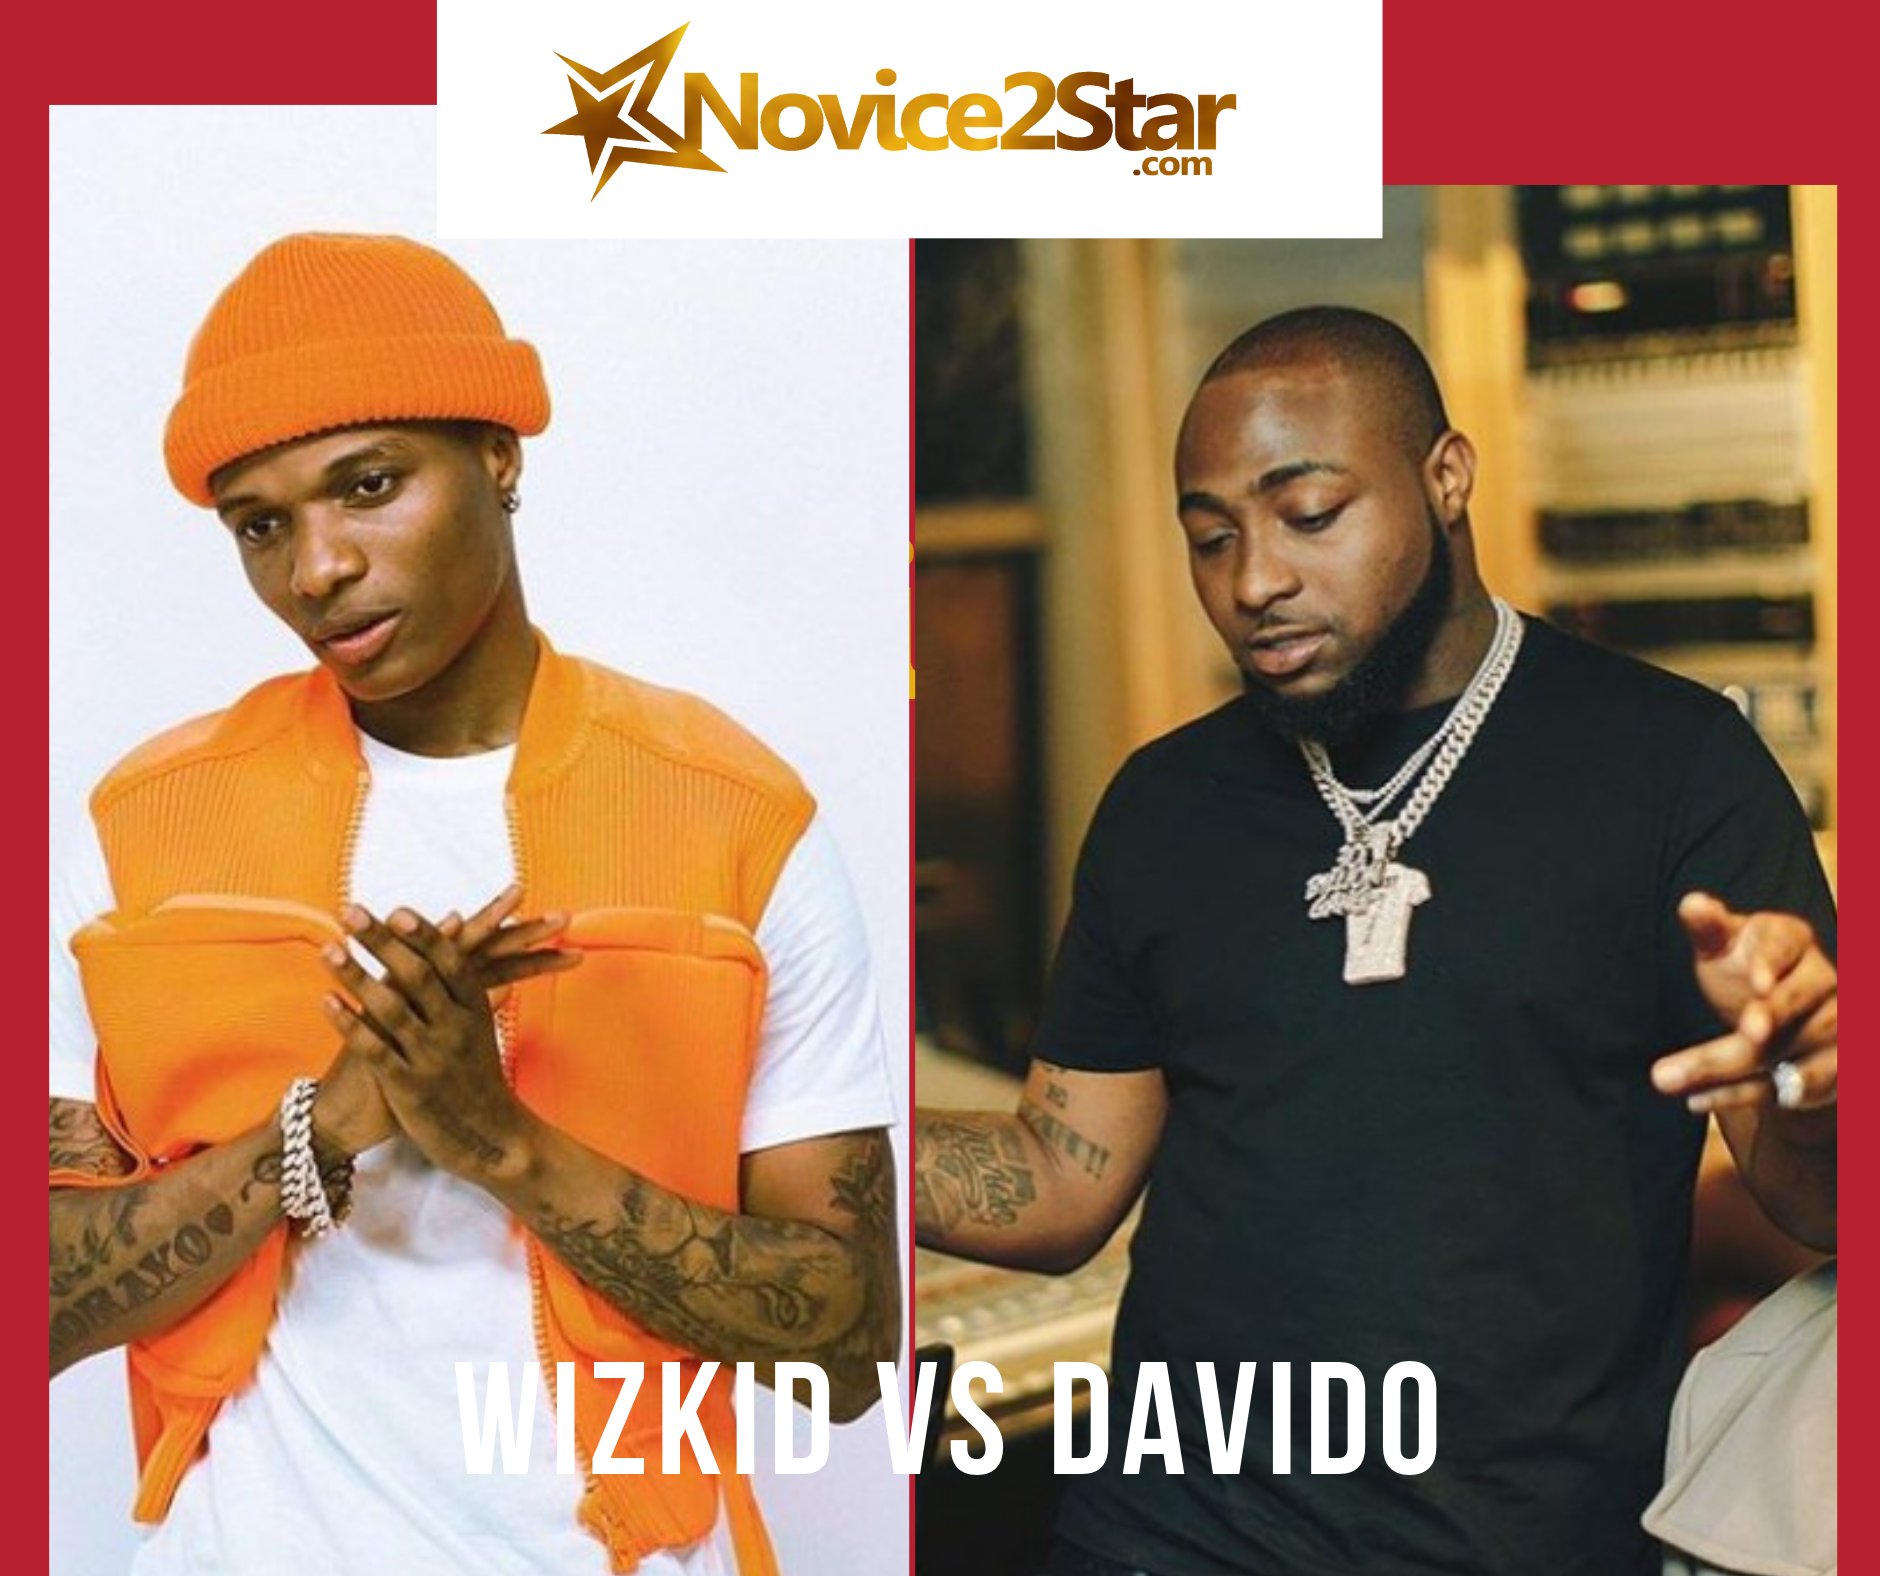 Wizkid Vs Davido: With Two Headies Awards At Piece, Who wins The Headies Awards 2019?